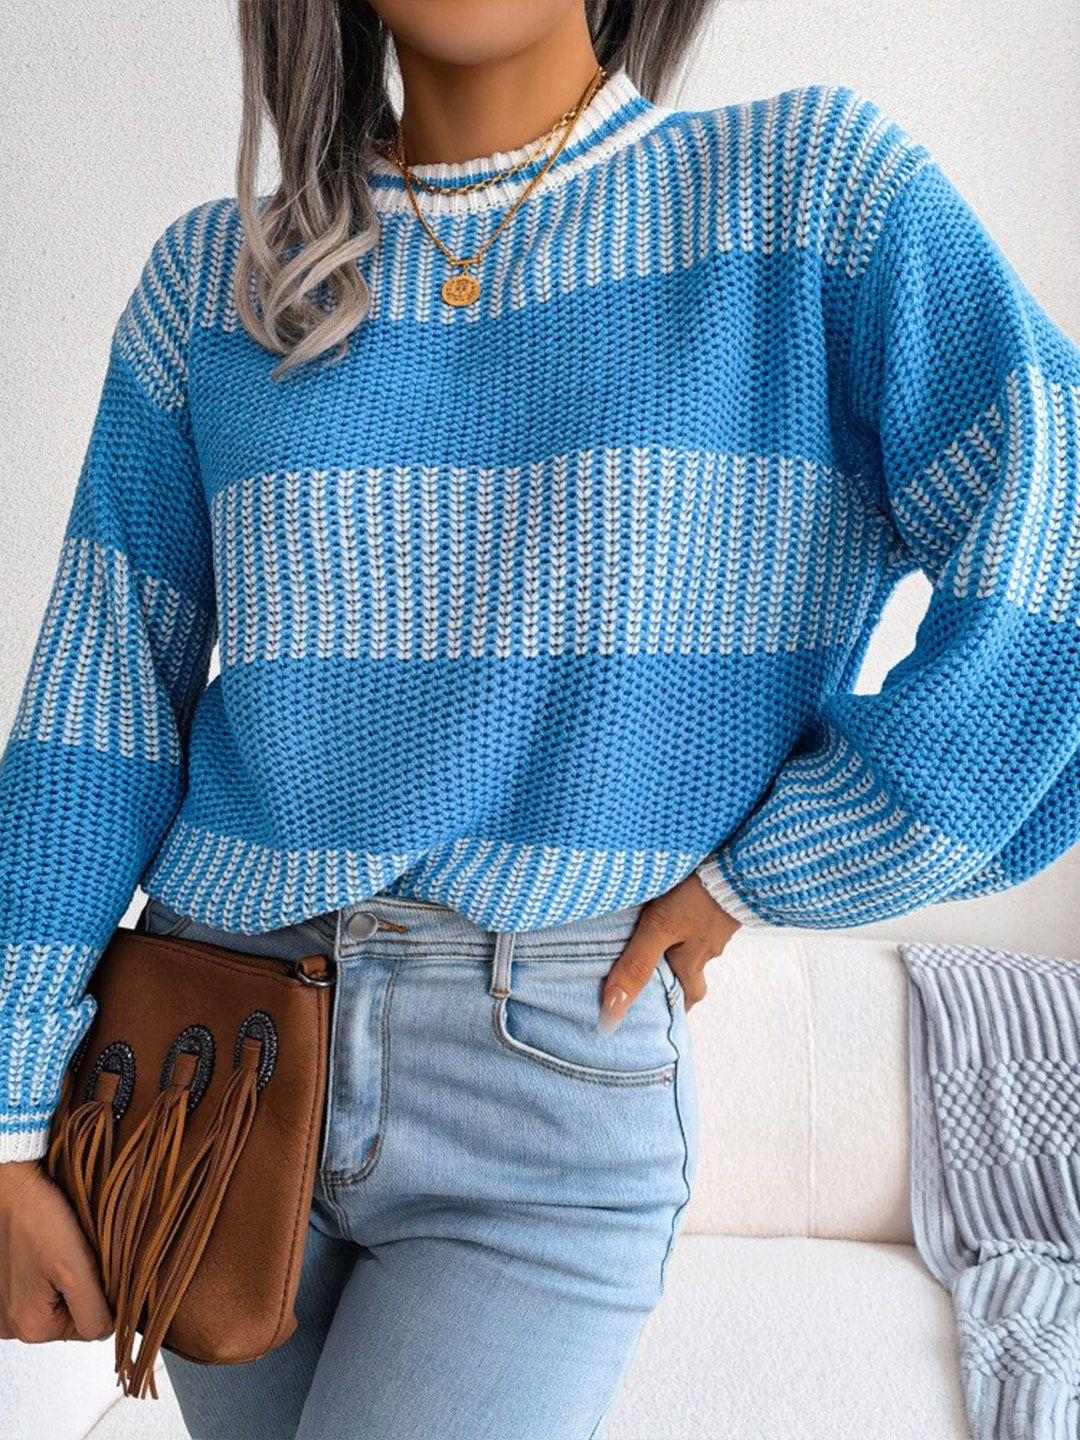 stylecast women blue cable knit colourblocked pullover